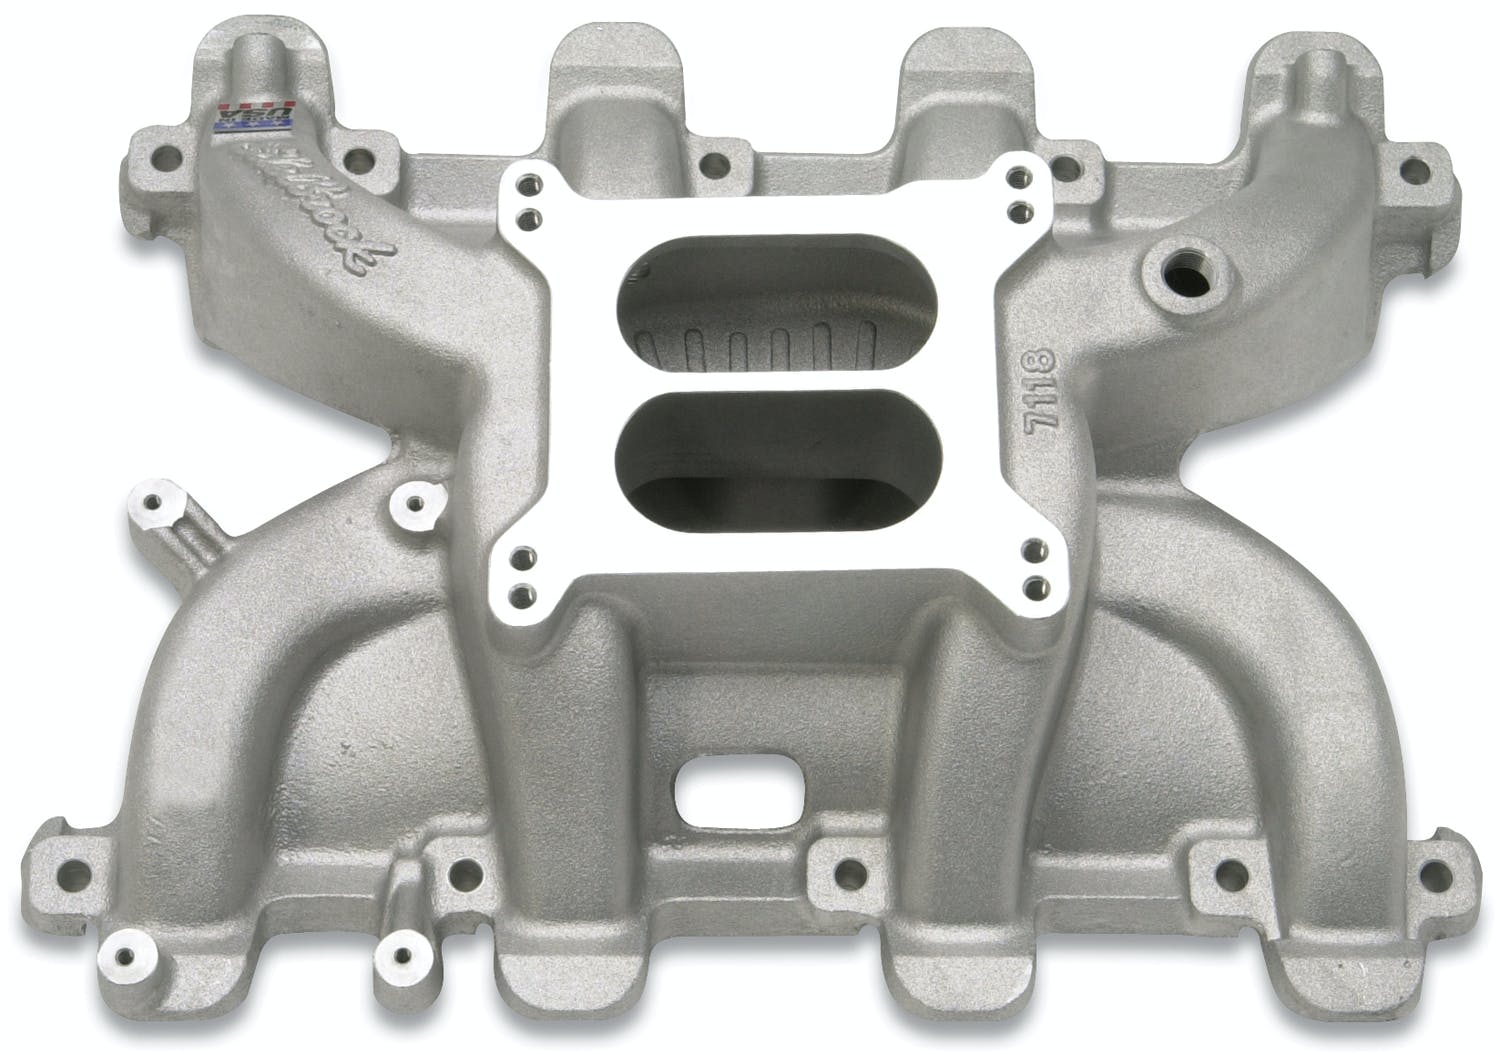 Edelbrock 71187 MANIFOLD PERF RPM FOR GM LS1 CARBURETED